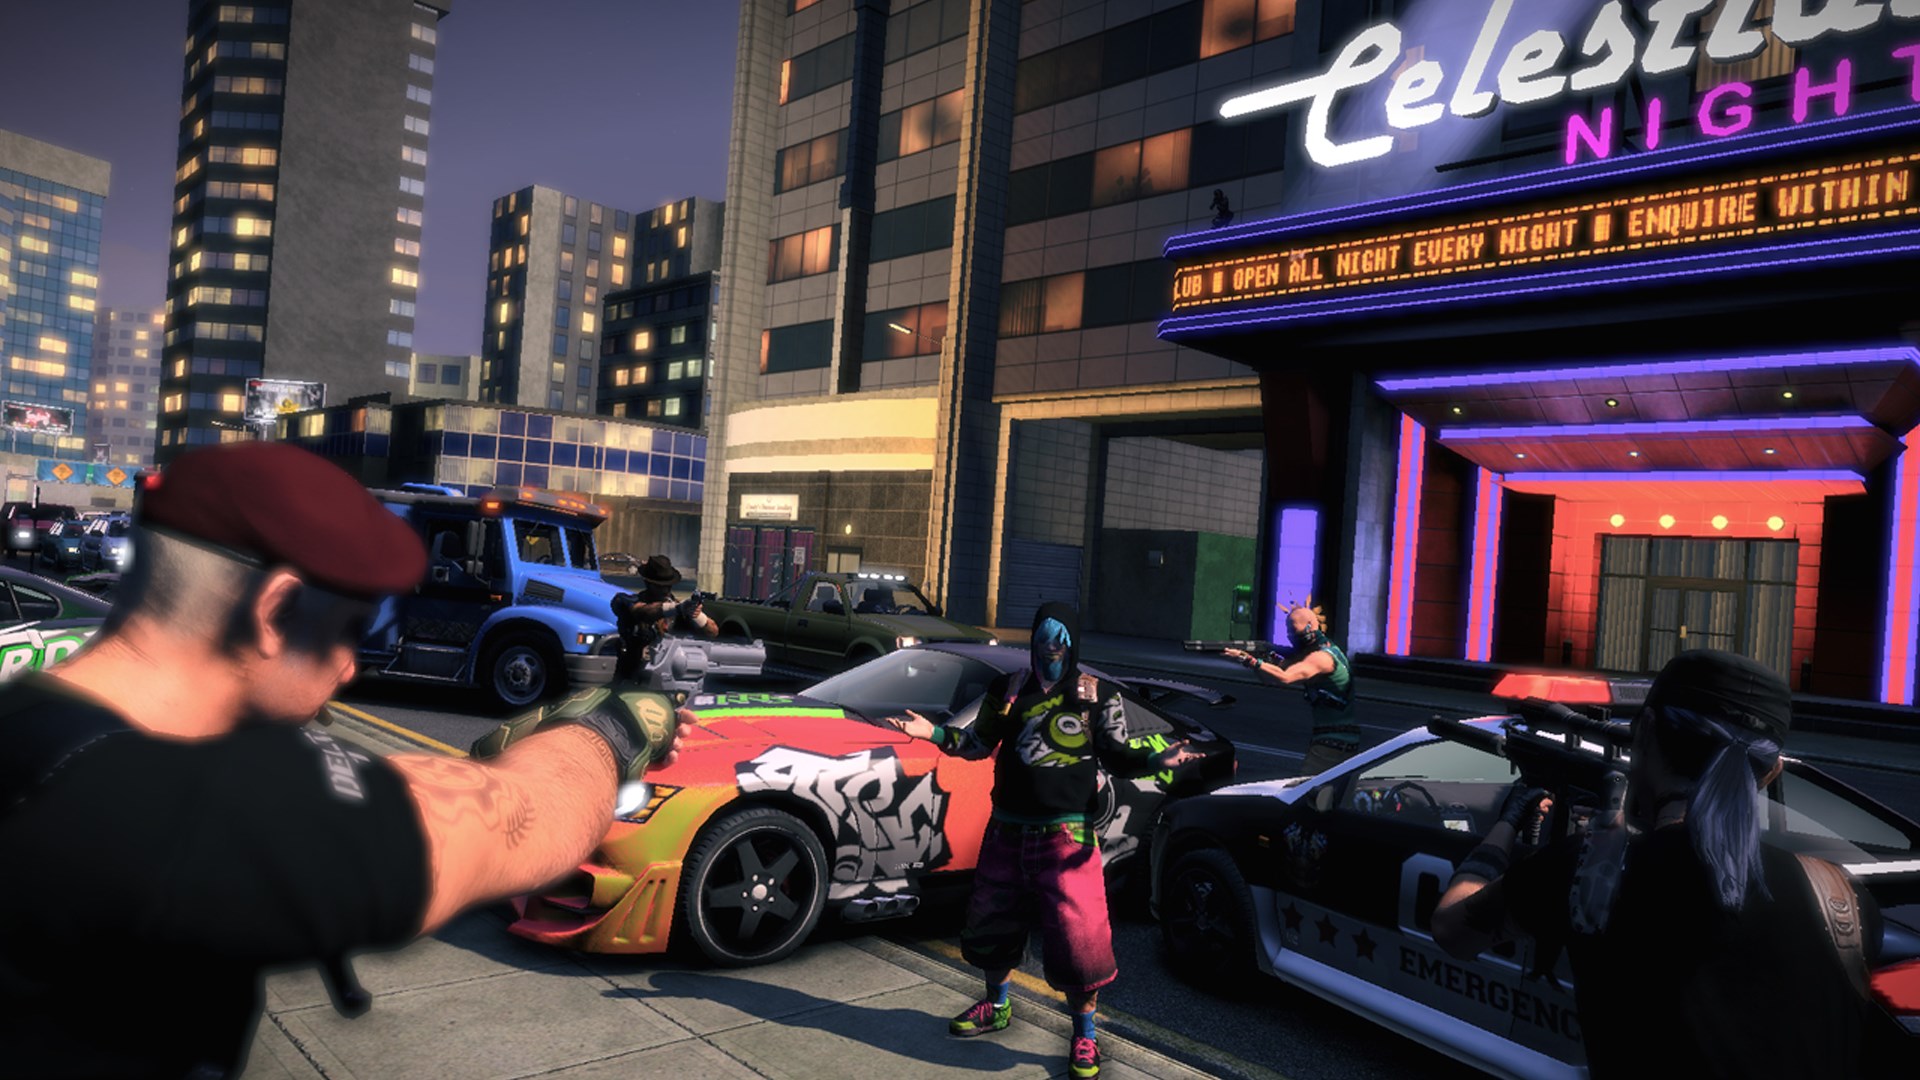 Apb reloaded for steam фото 82